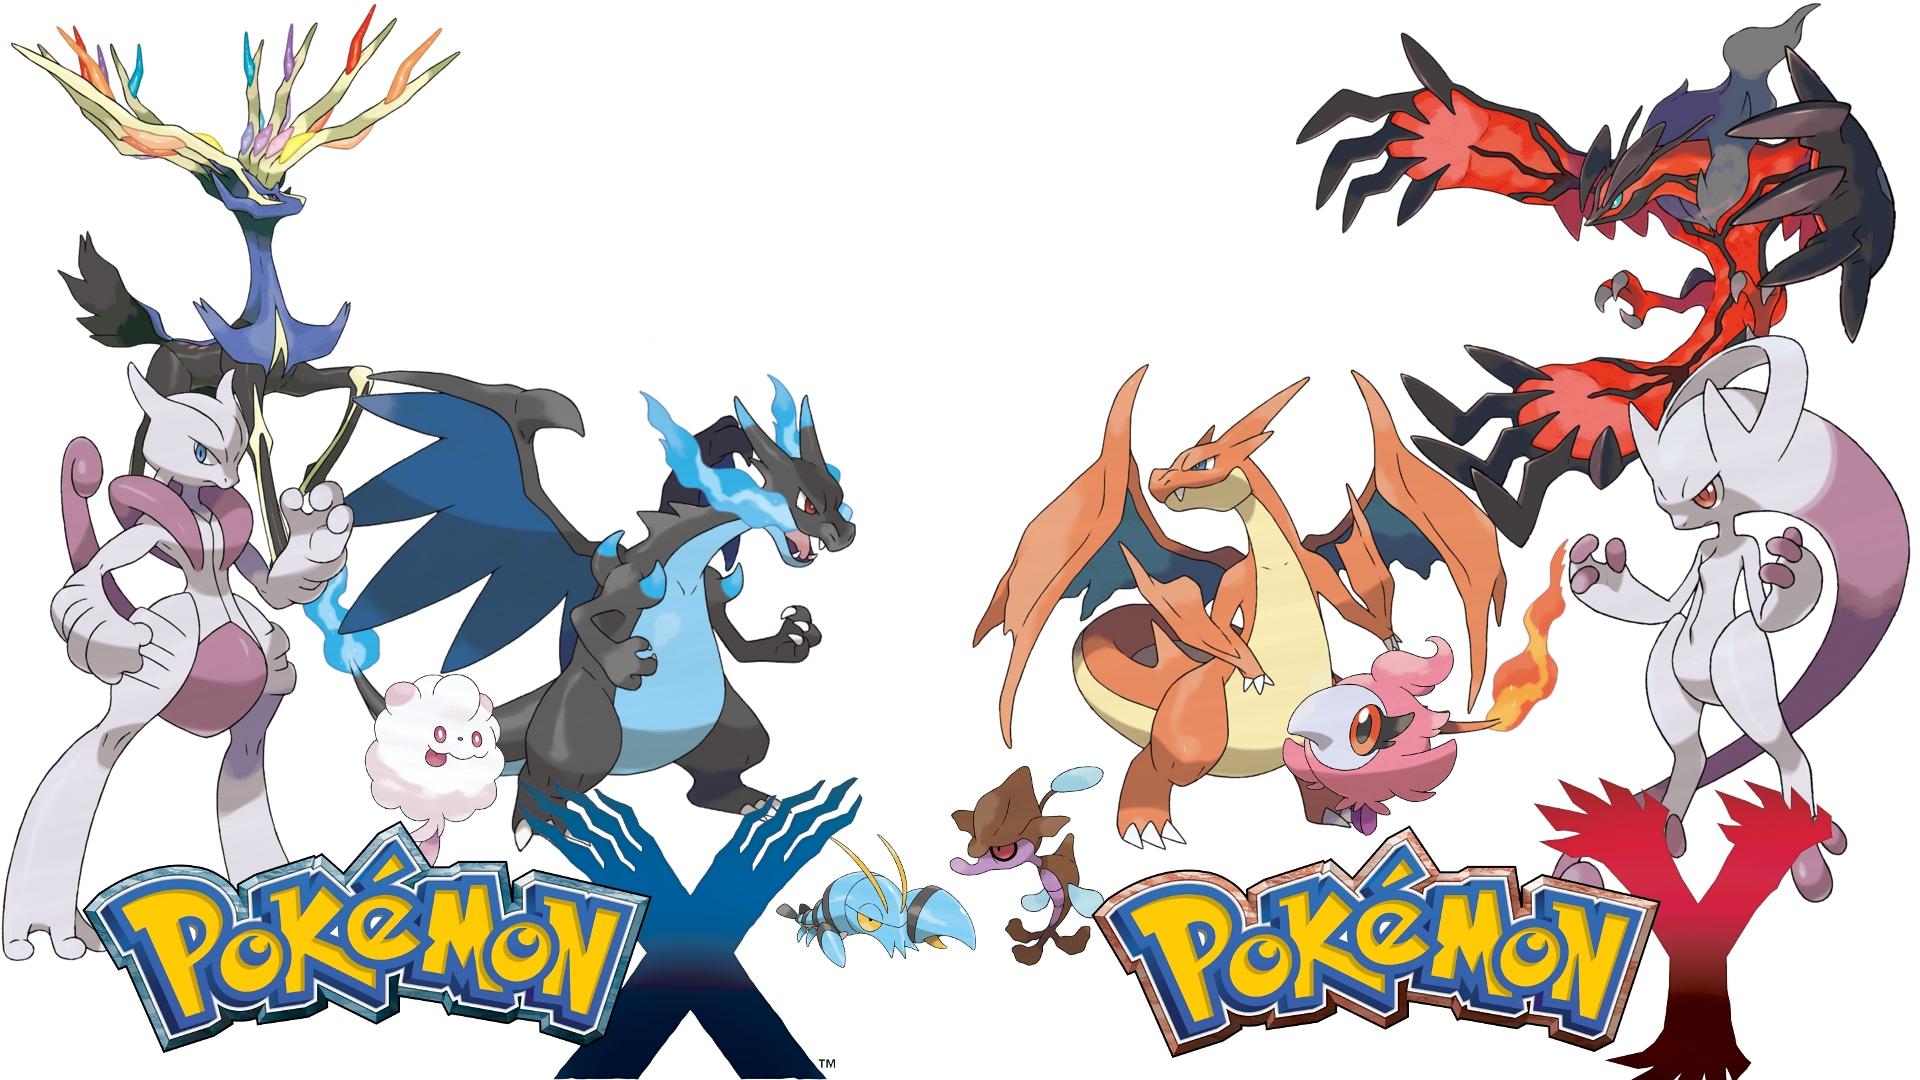 Pokemon X and Y. The Inverse Look